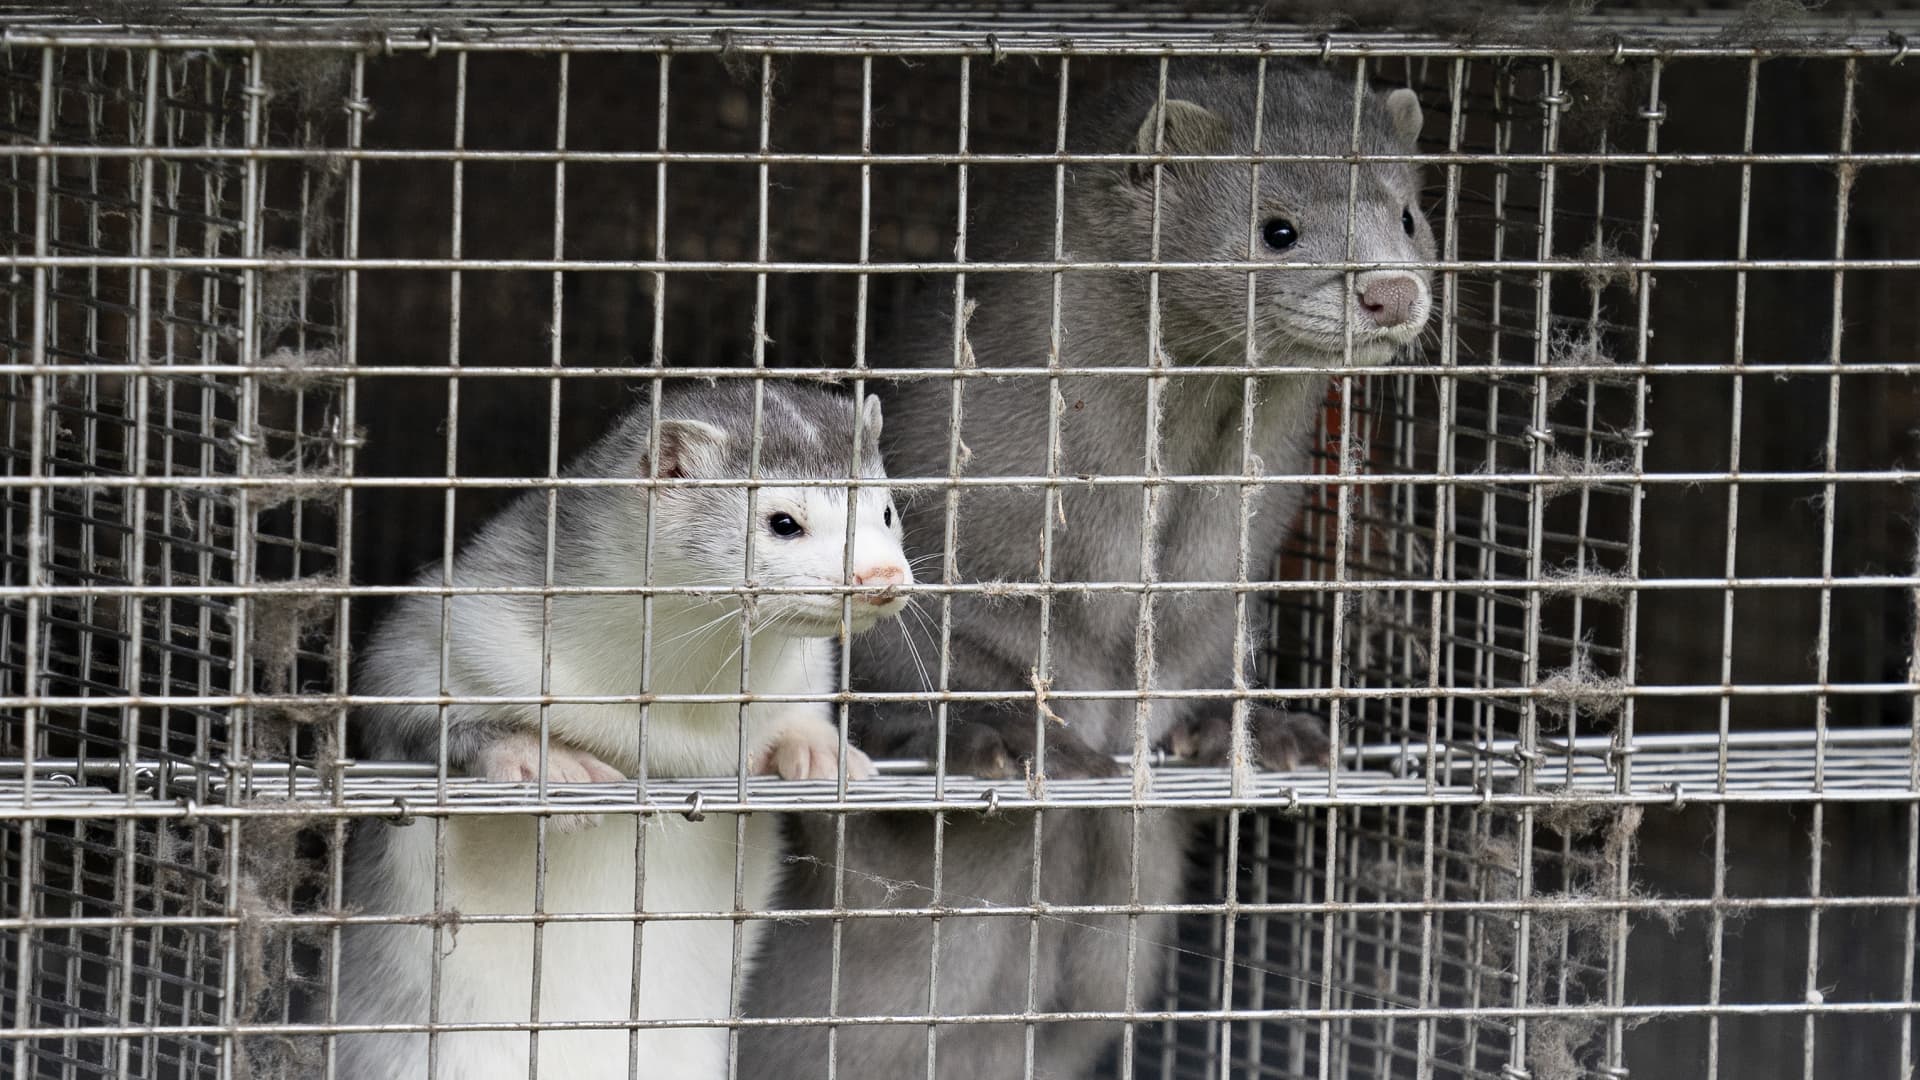 Minks are seen at a farm in Gjol, northern Denmark on October 9, 2020.